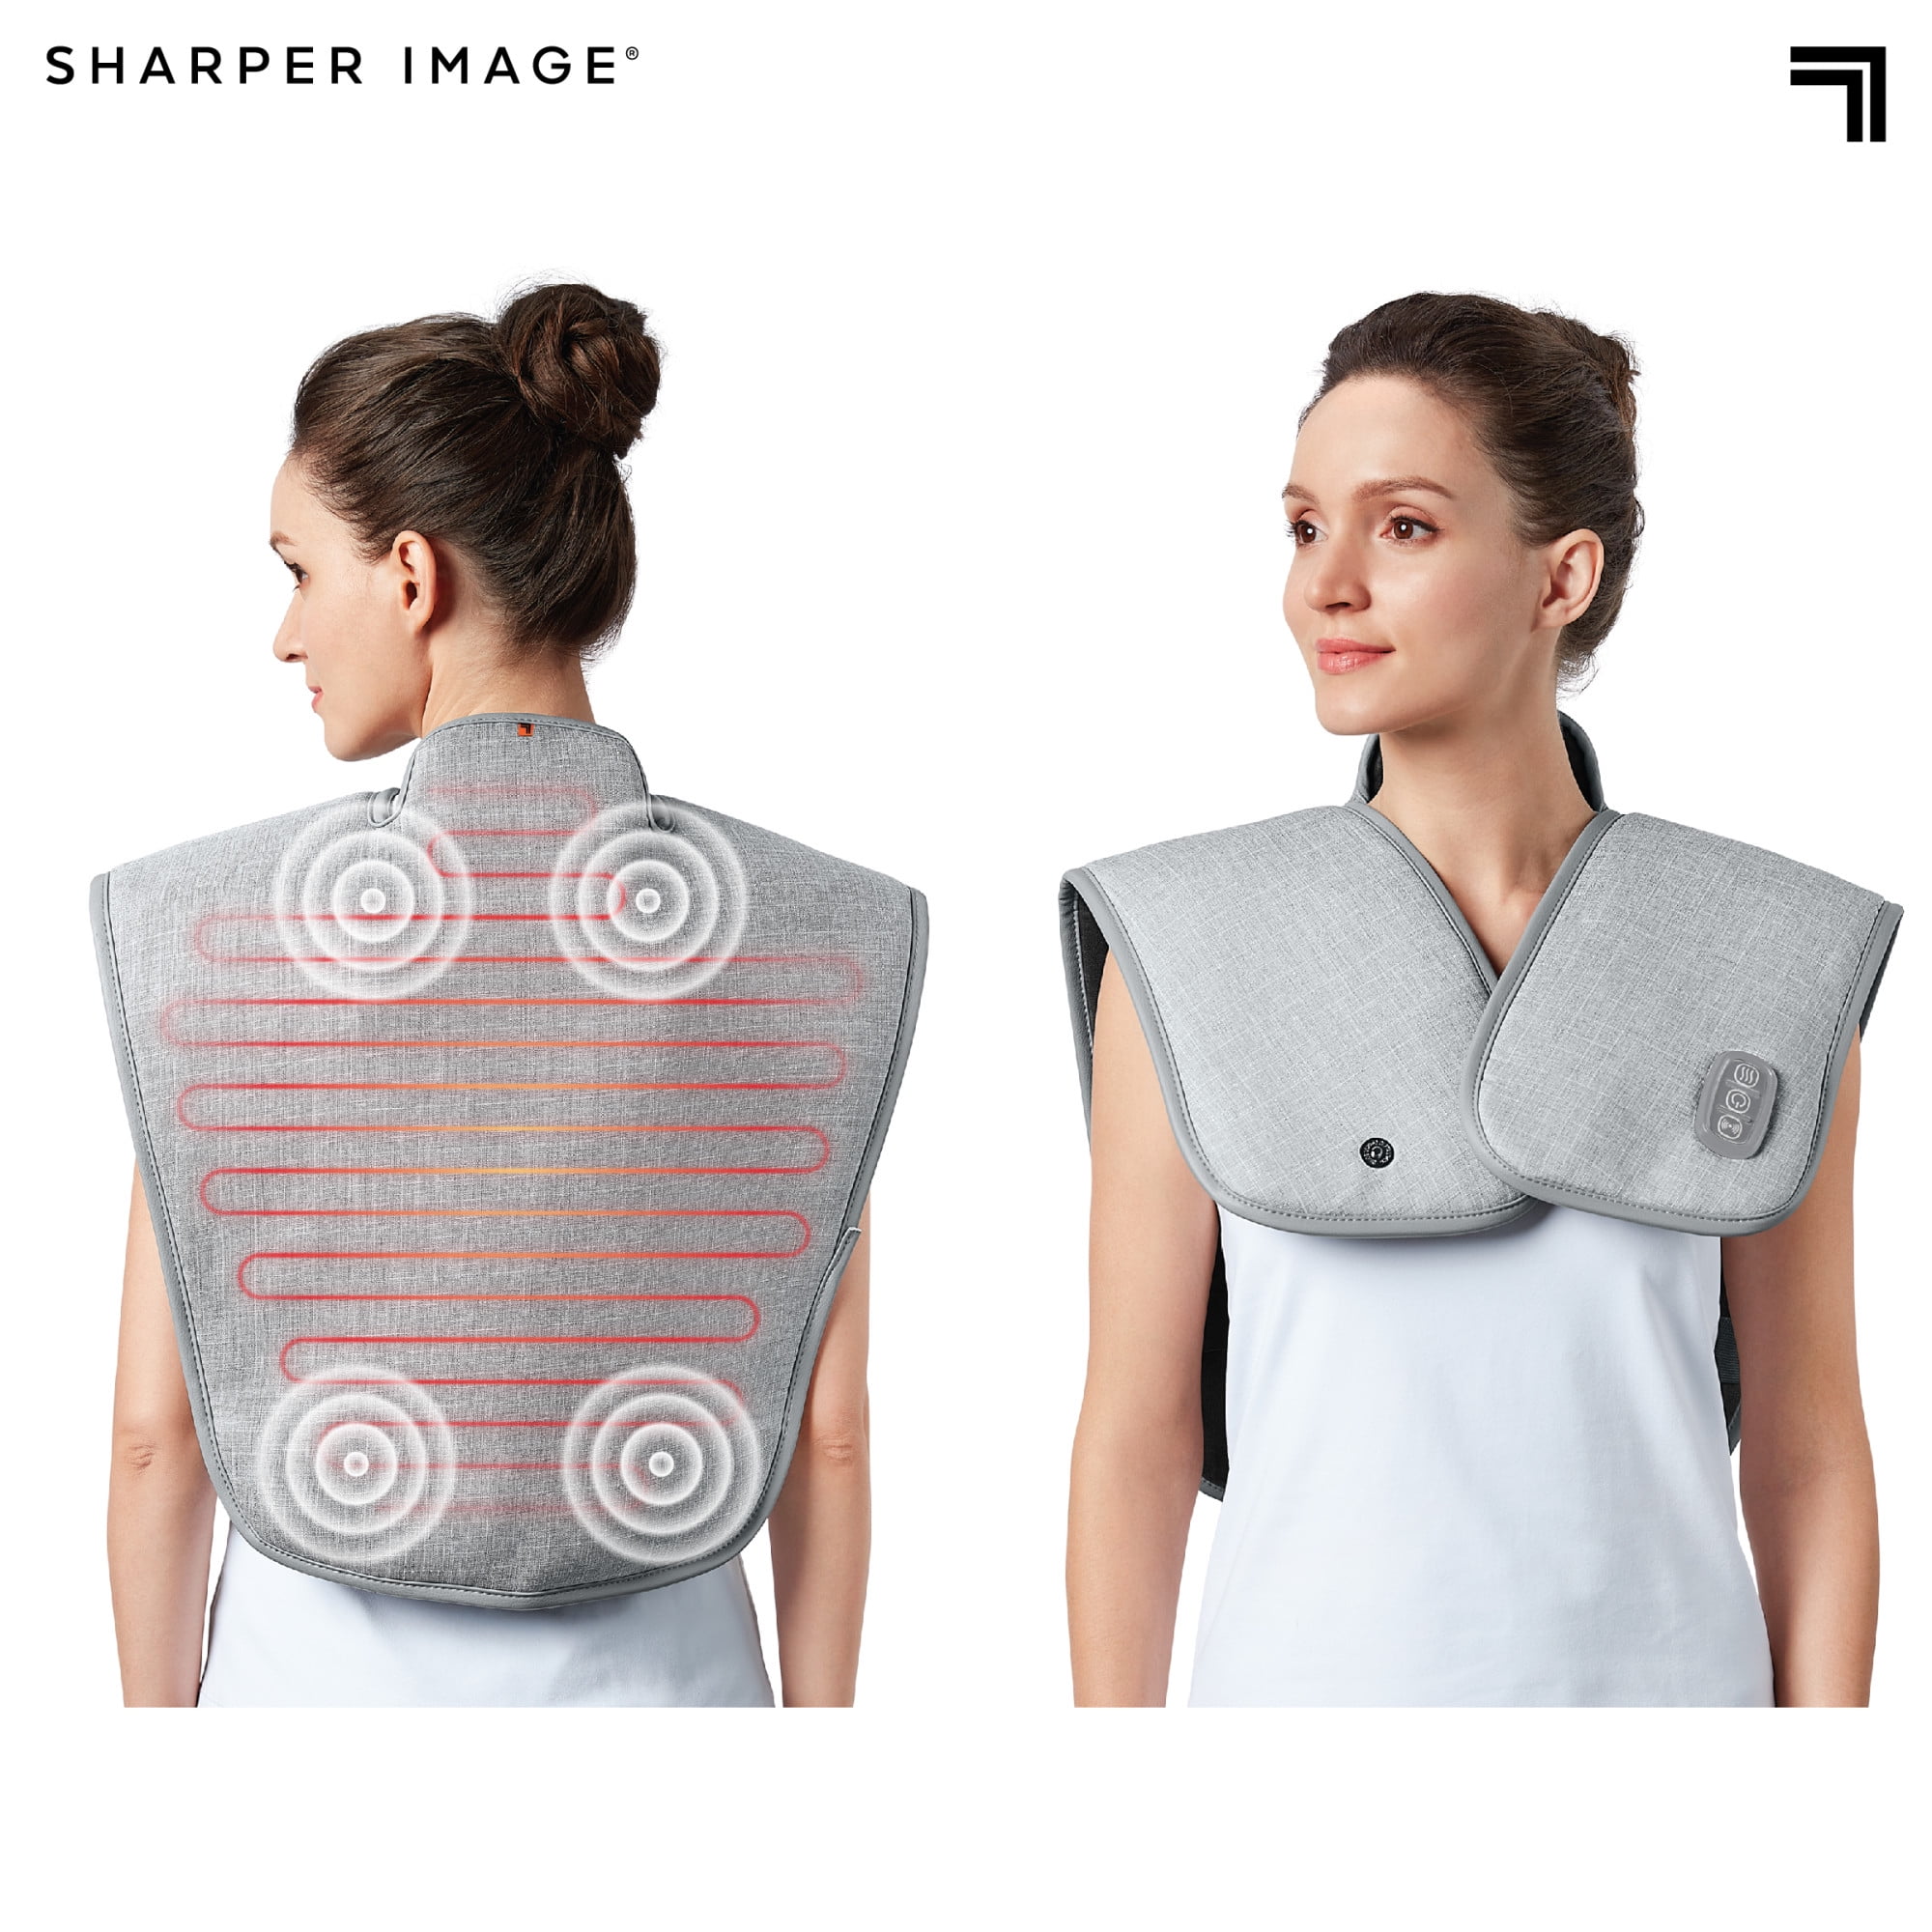 3-In-1 Heated Neck Therapy with Remote by Sharper Image